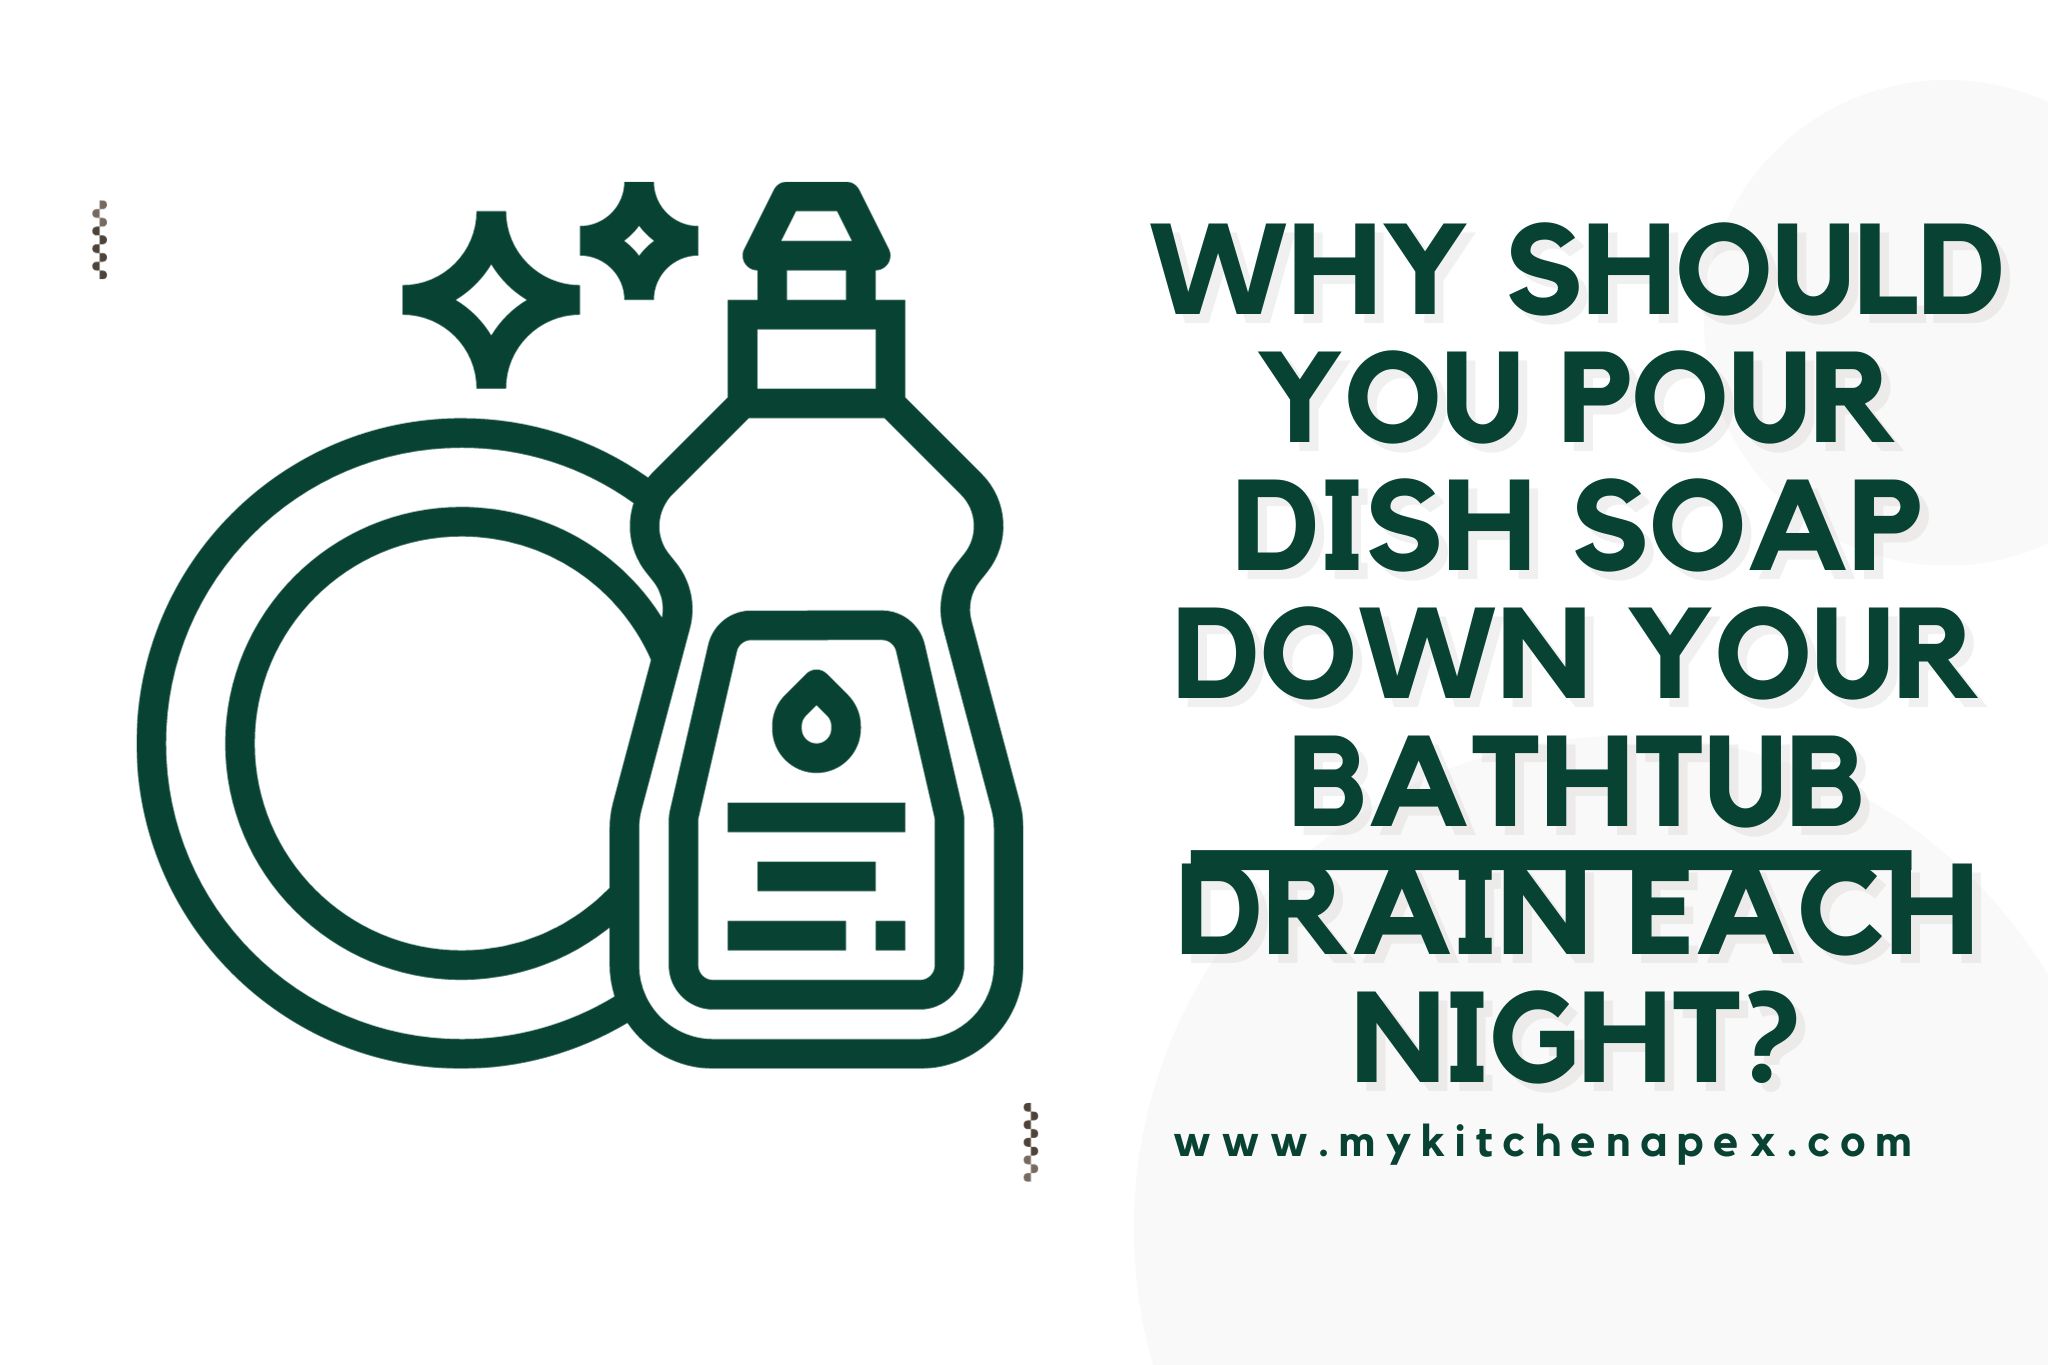 Why should you pour dish soap down your bathtub drain each night?